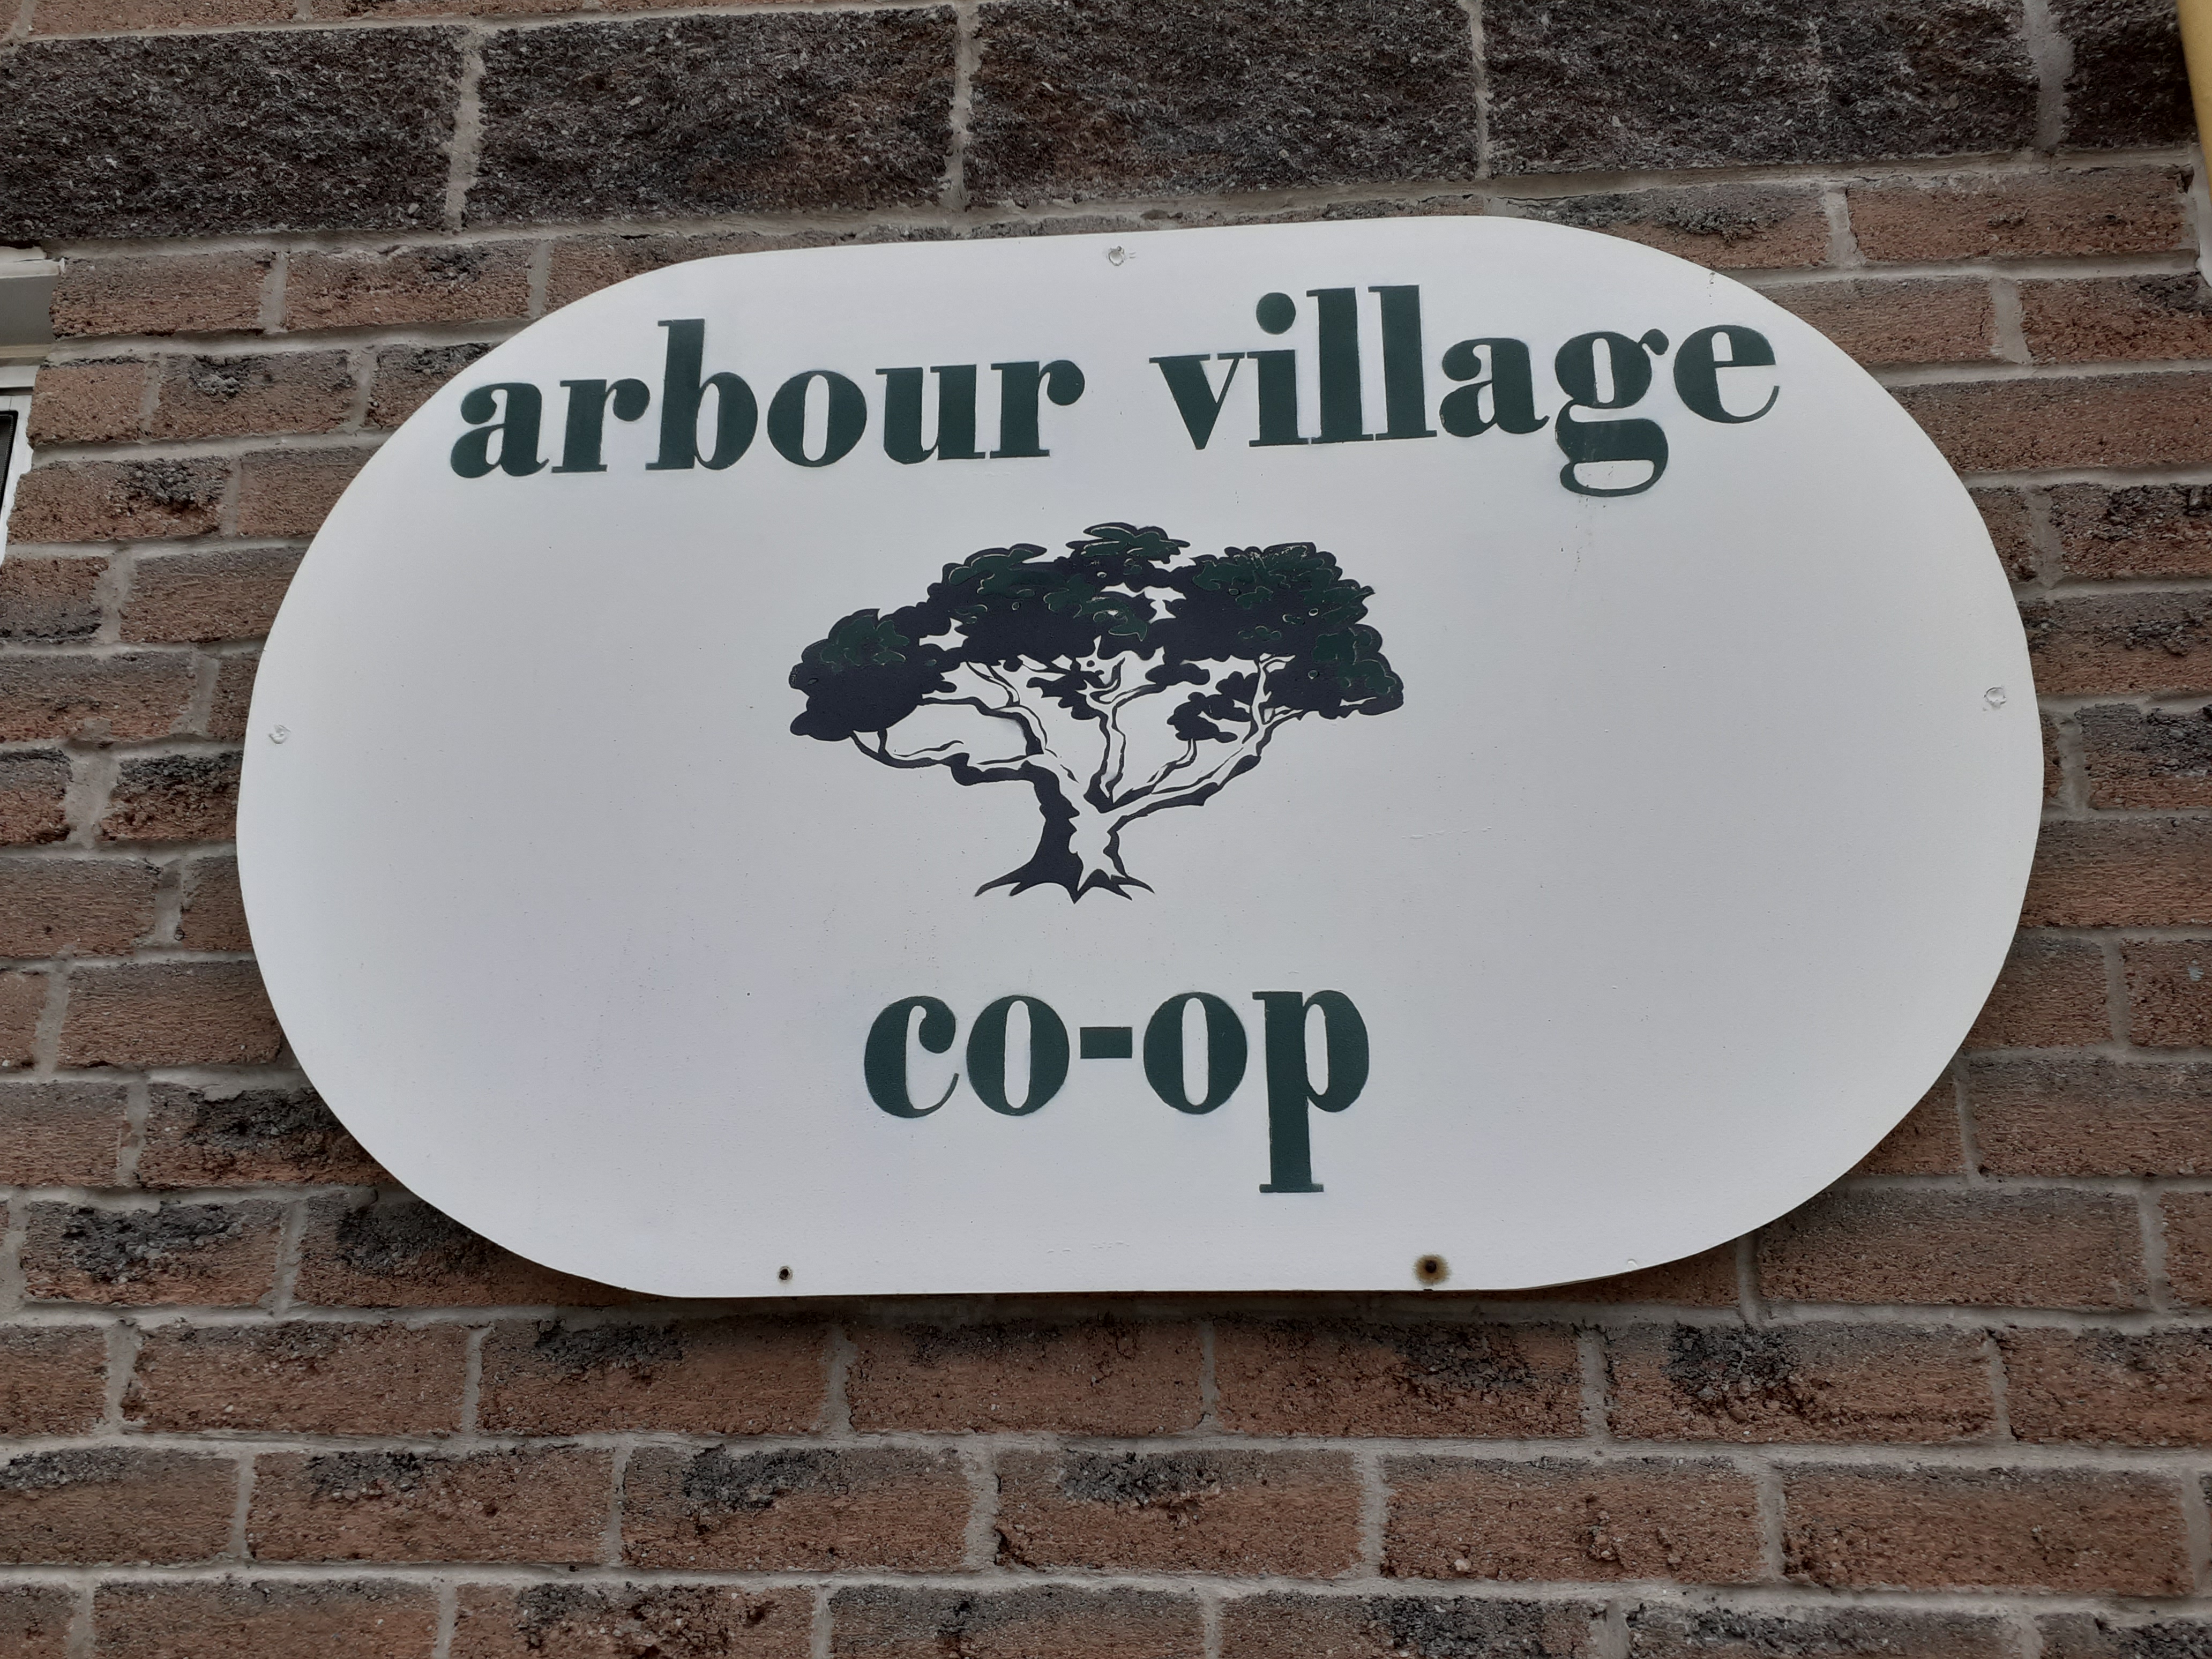 Arbour Village Co-op written on a sign with a picture of a tree hanging on a brick wall